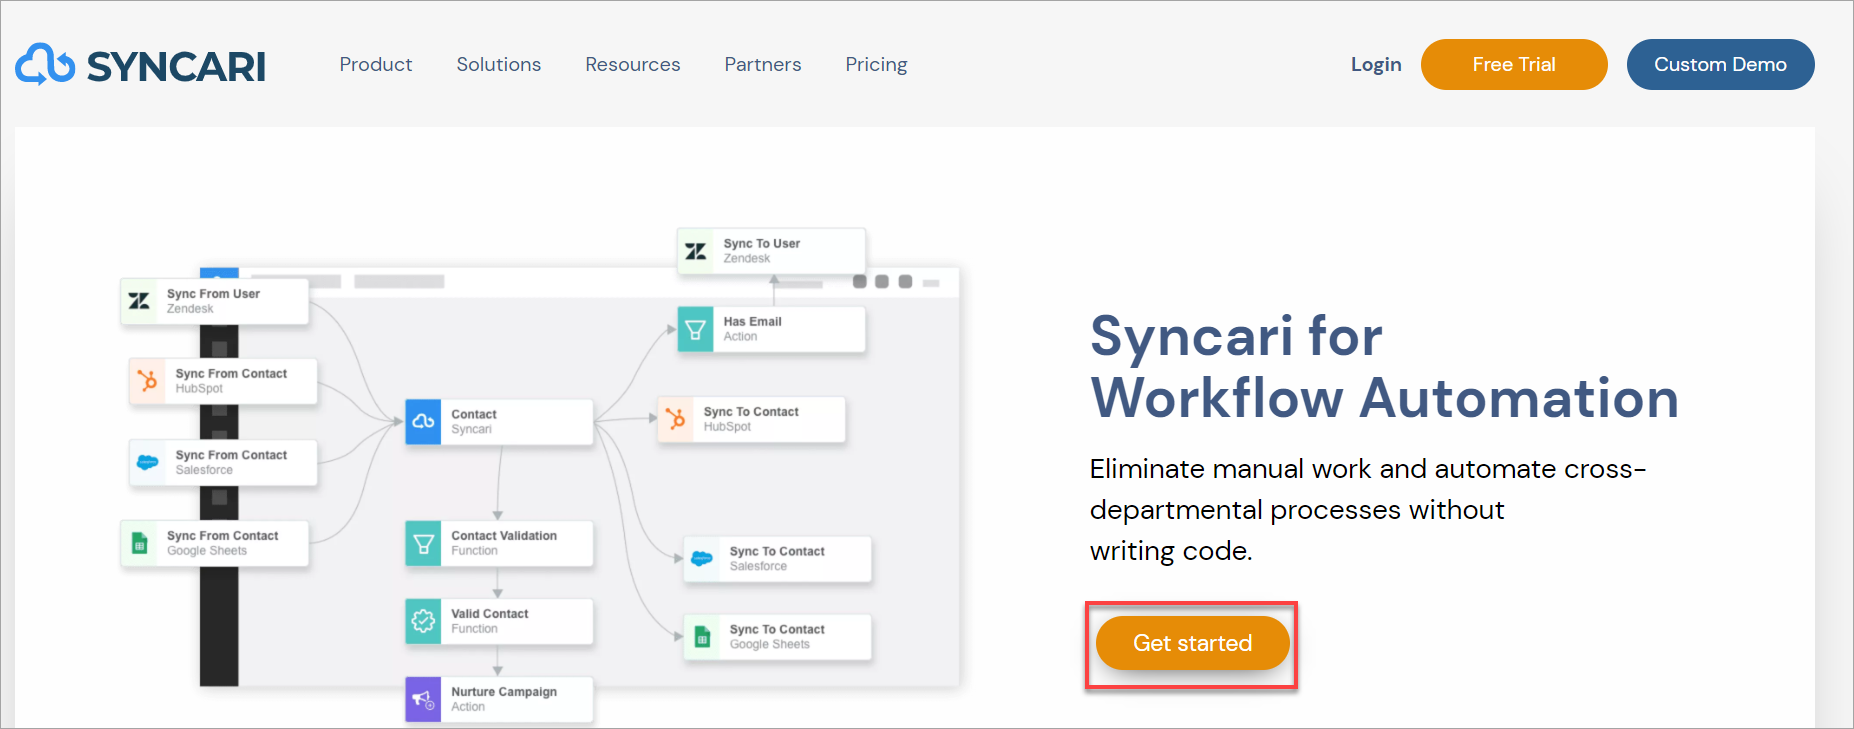 Utilize Syncari's dual analytical and transactional analytics platform to enable integrated sync, data processing, and management through APIs.